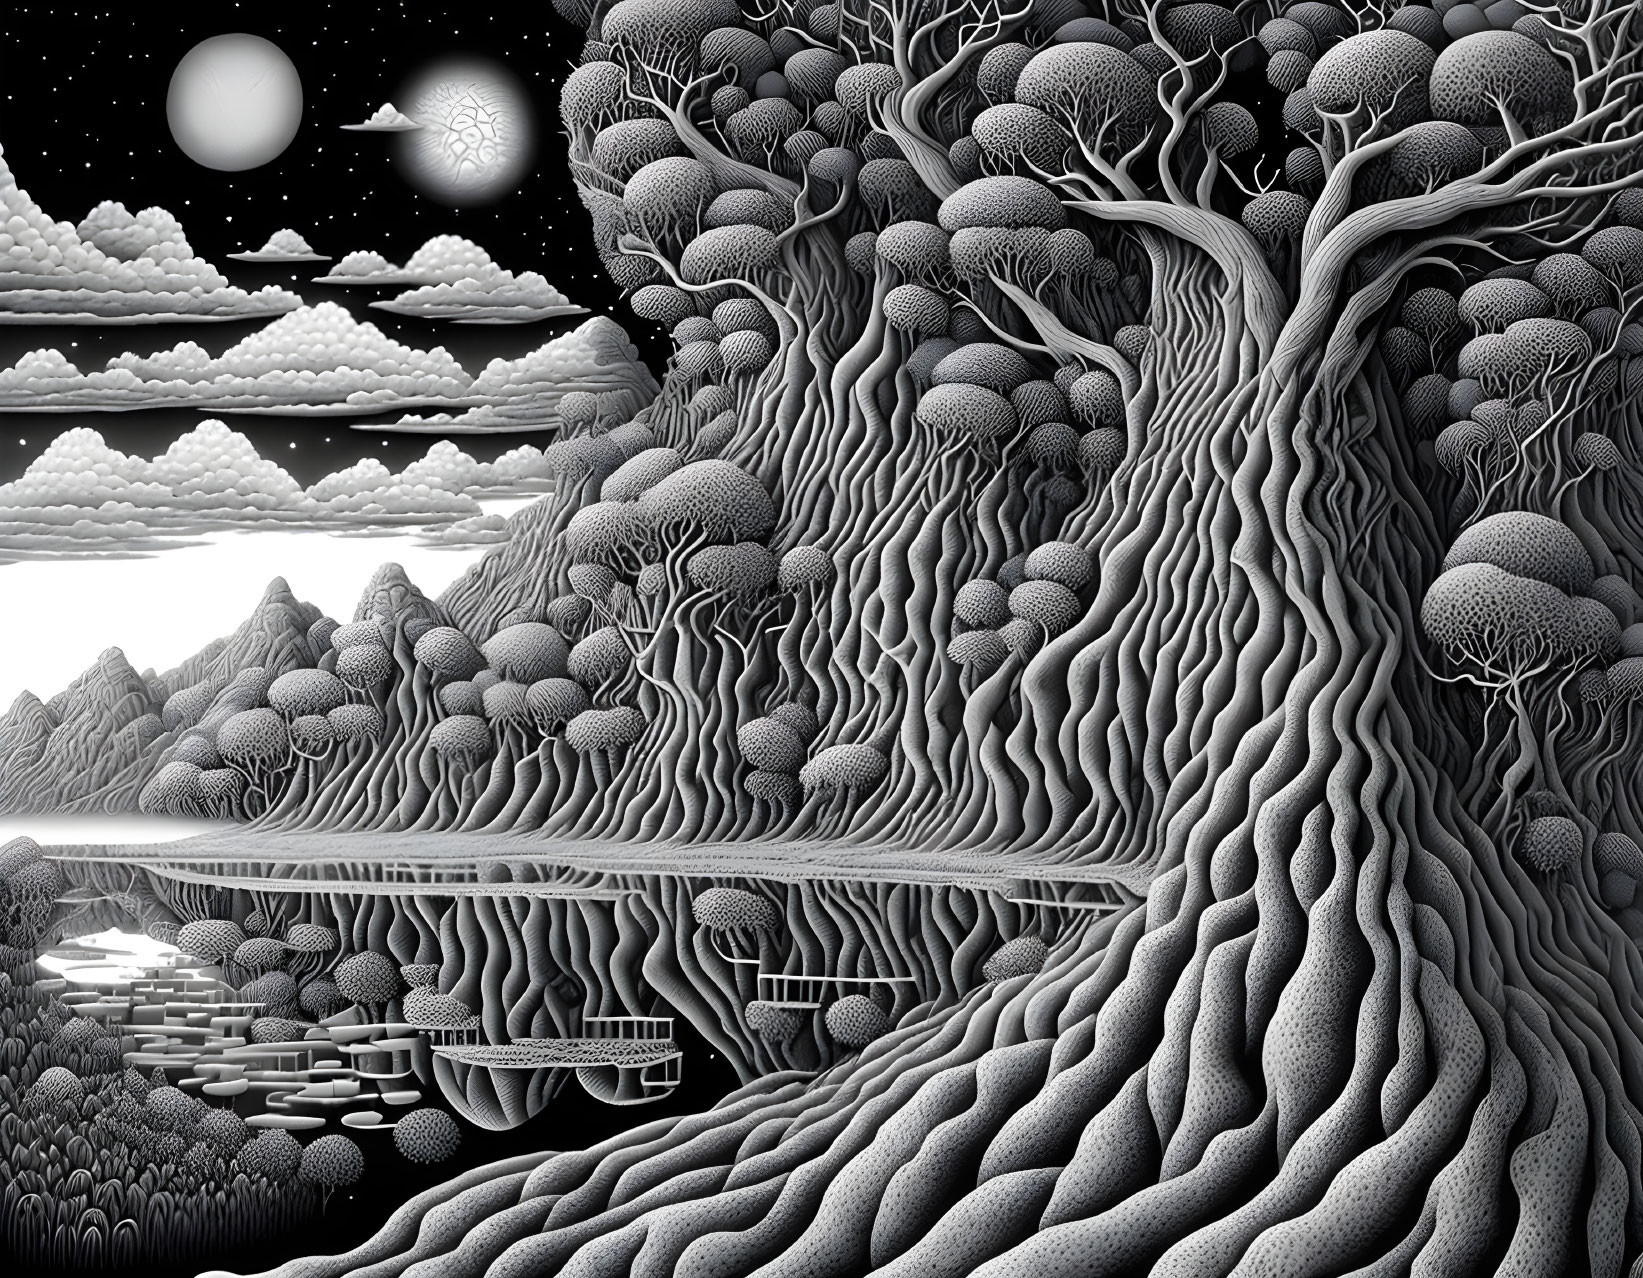 Monochromatic surreal landscape with large tree, undulating hills, floating islands, starry sky,